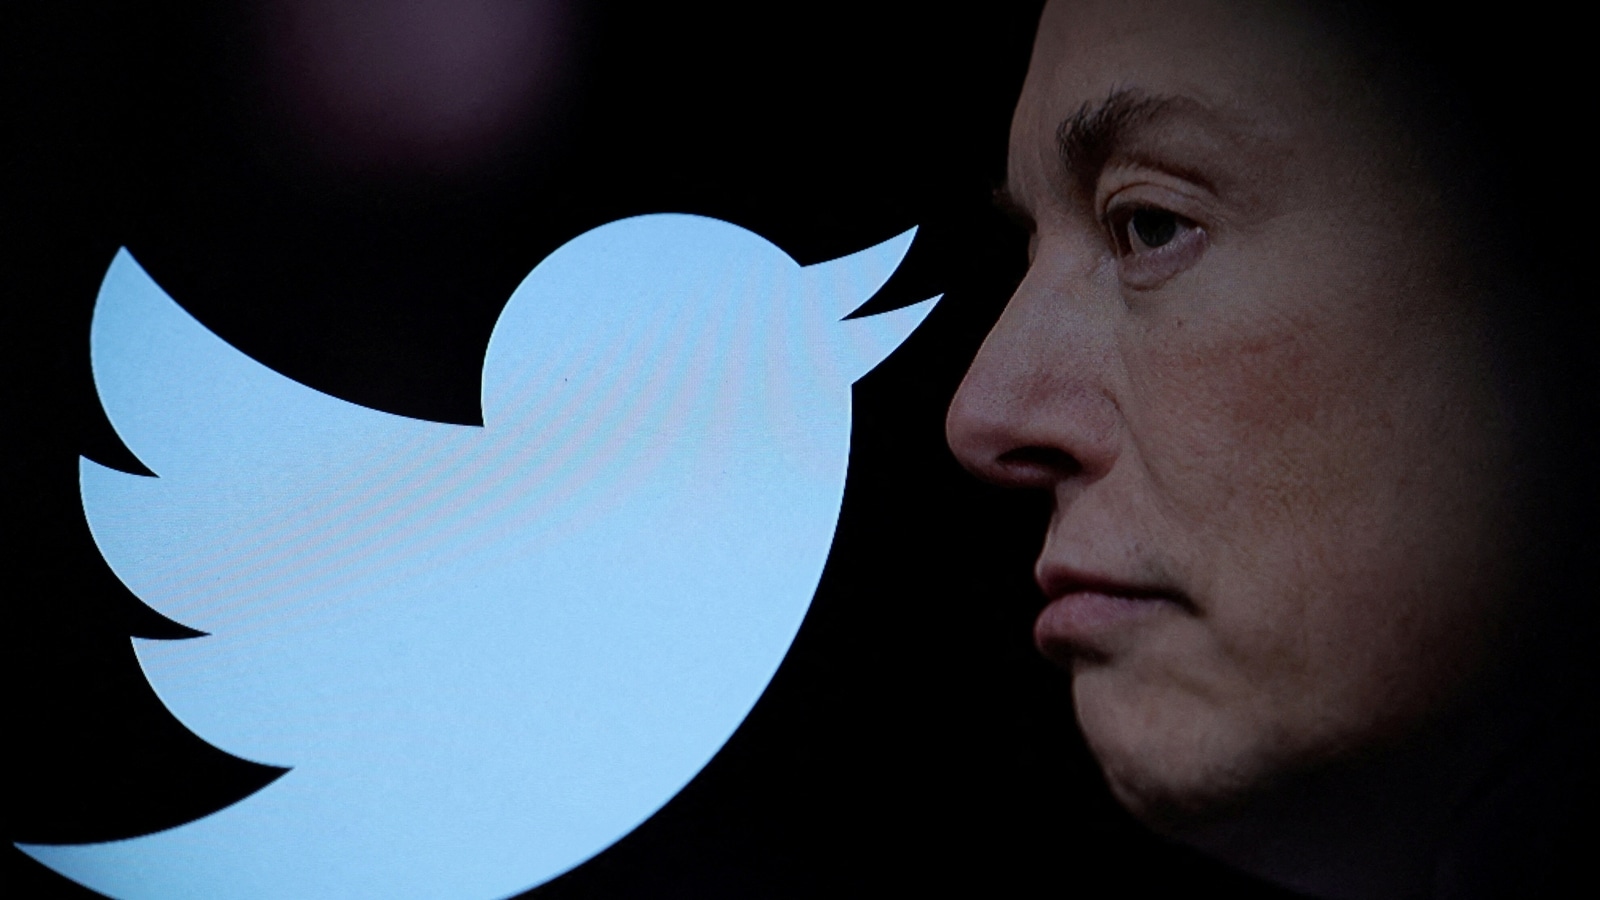 Elon Musk plans to assume Twitter CEO role, likely to do away with permanent bans